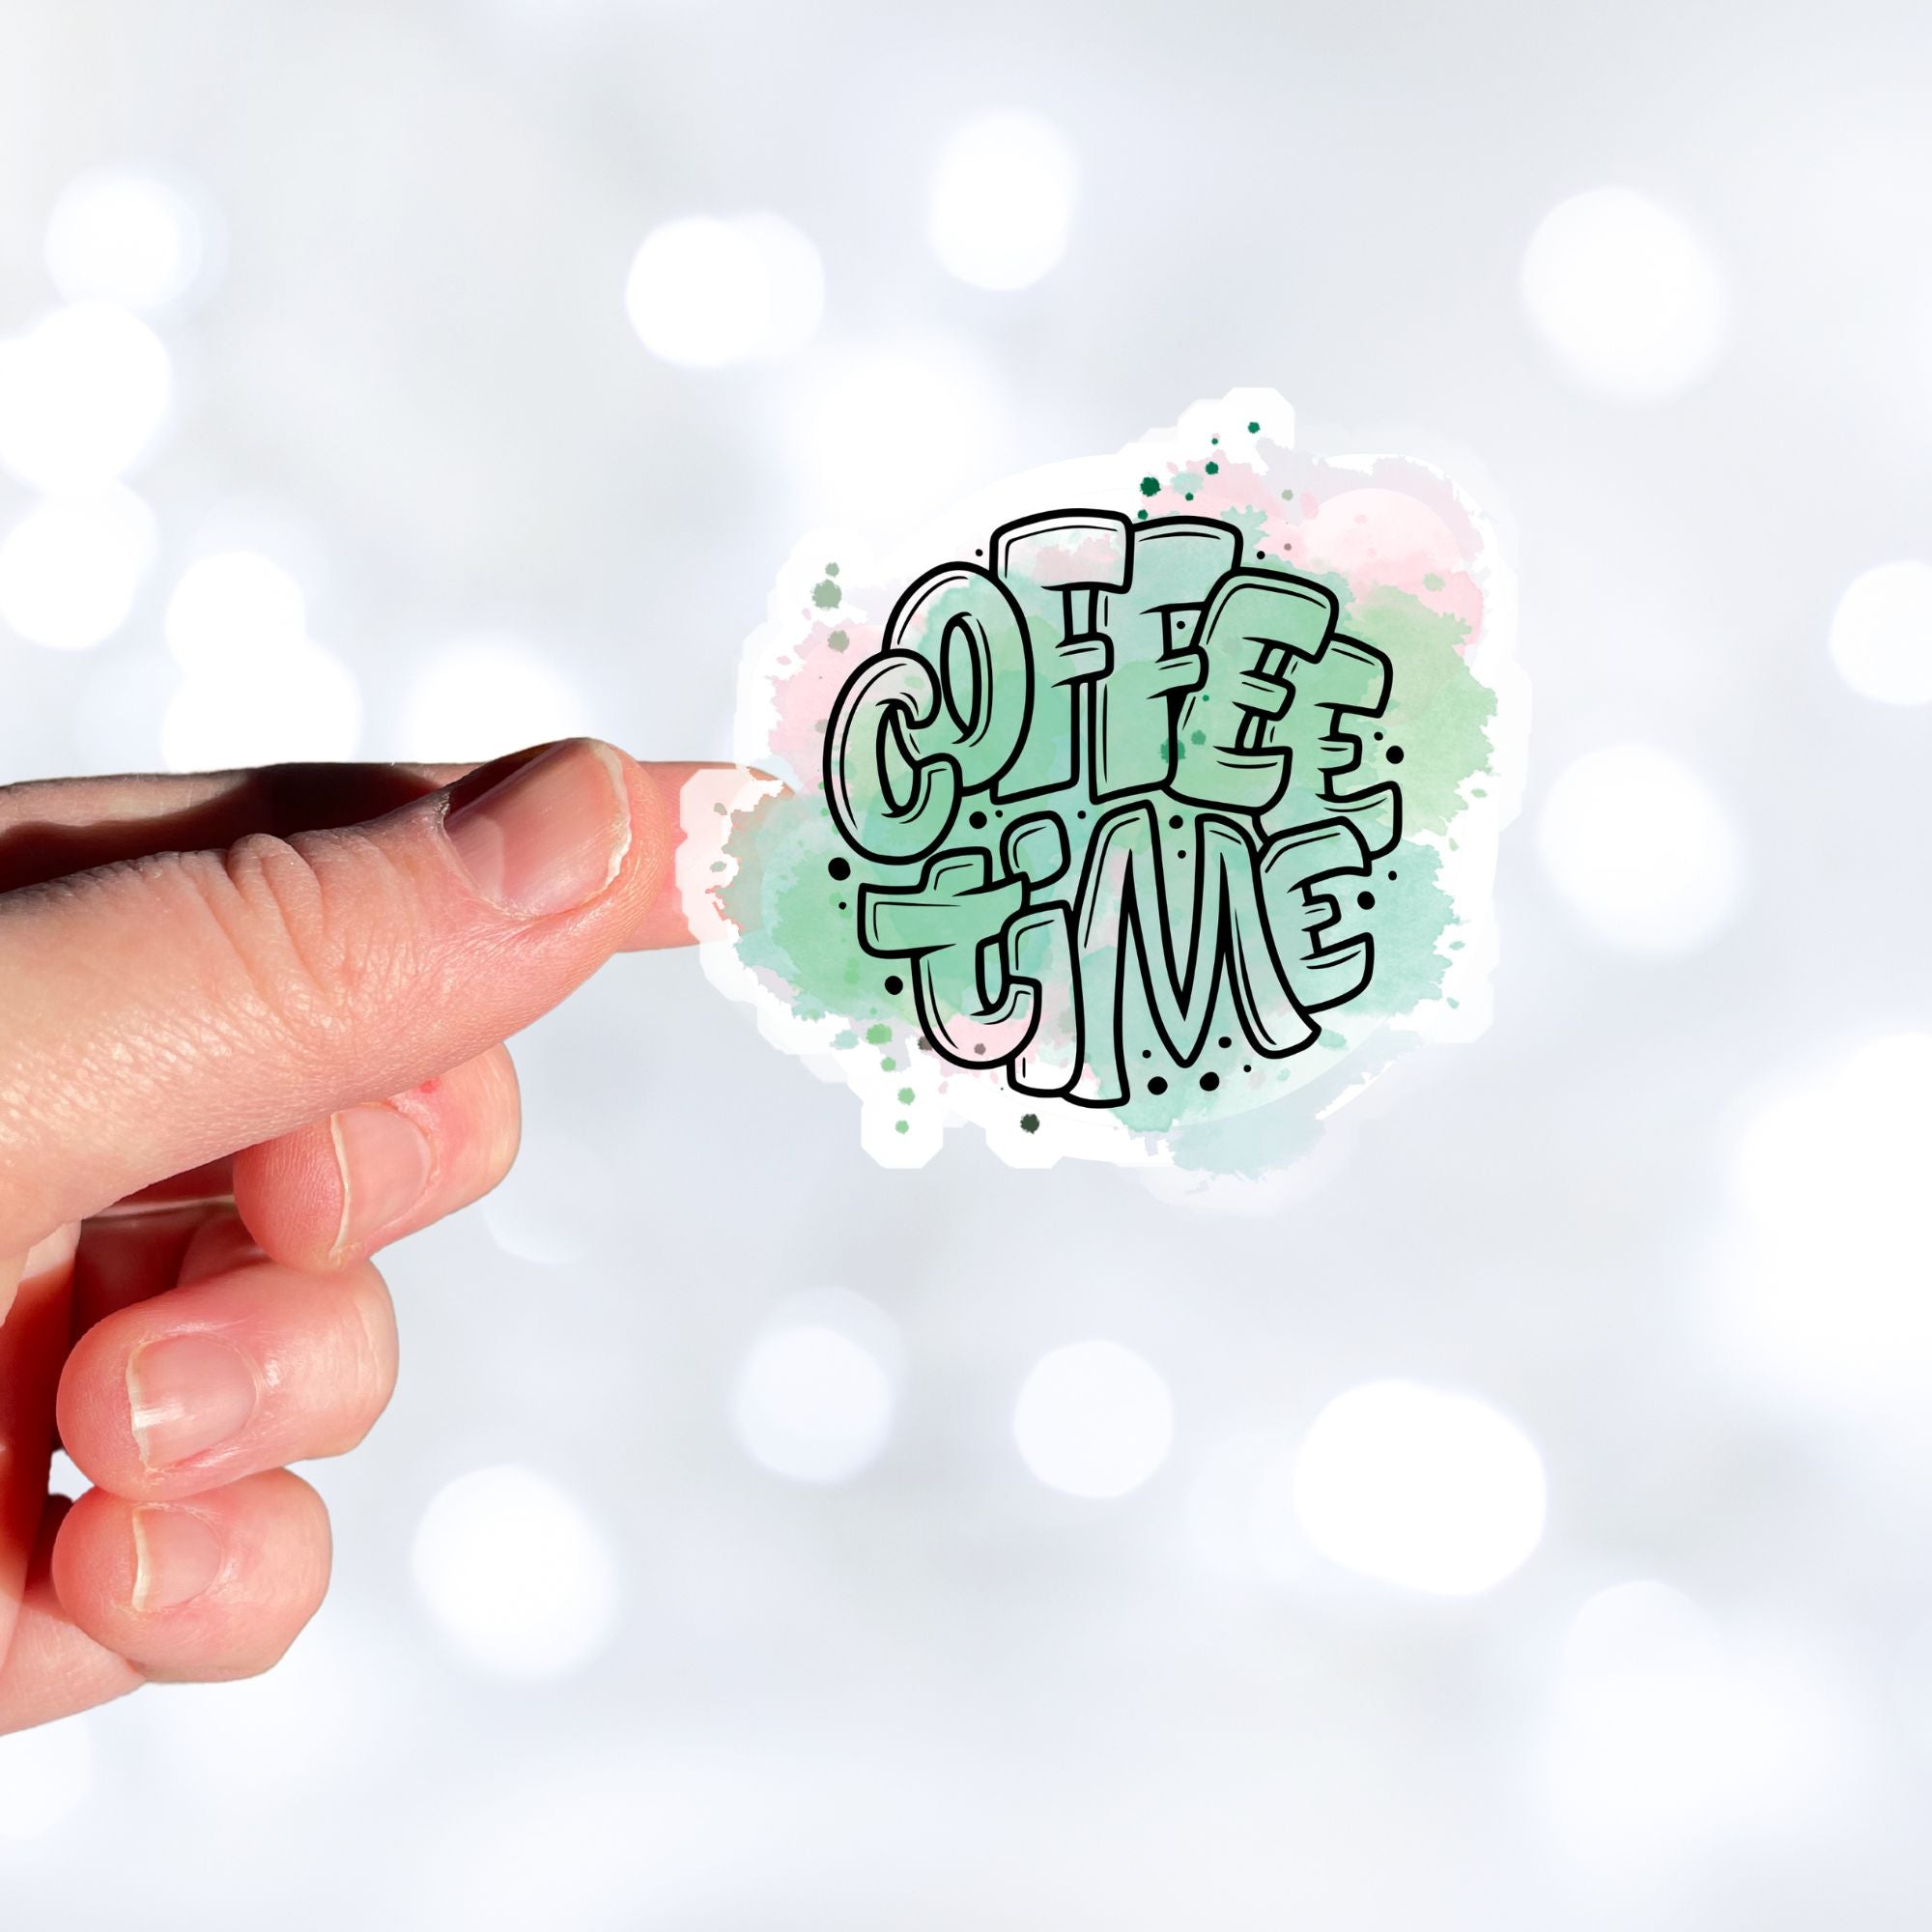 It's Coffee Time! This individual die-cut sticker features the words Coffee Time over a pastel green and pink background. This coffee sticker is great for all coffee lovers! This image shows a hand holding the Coffee Time sticker.